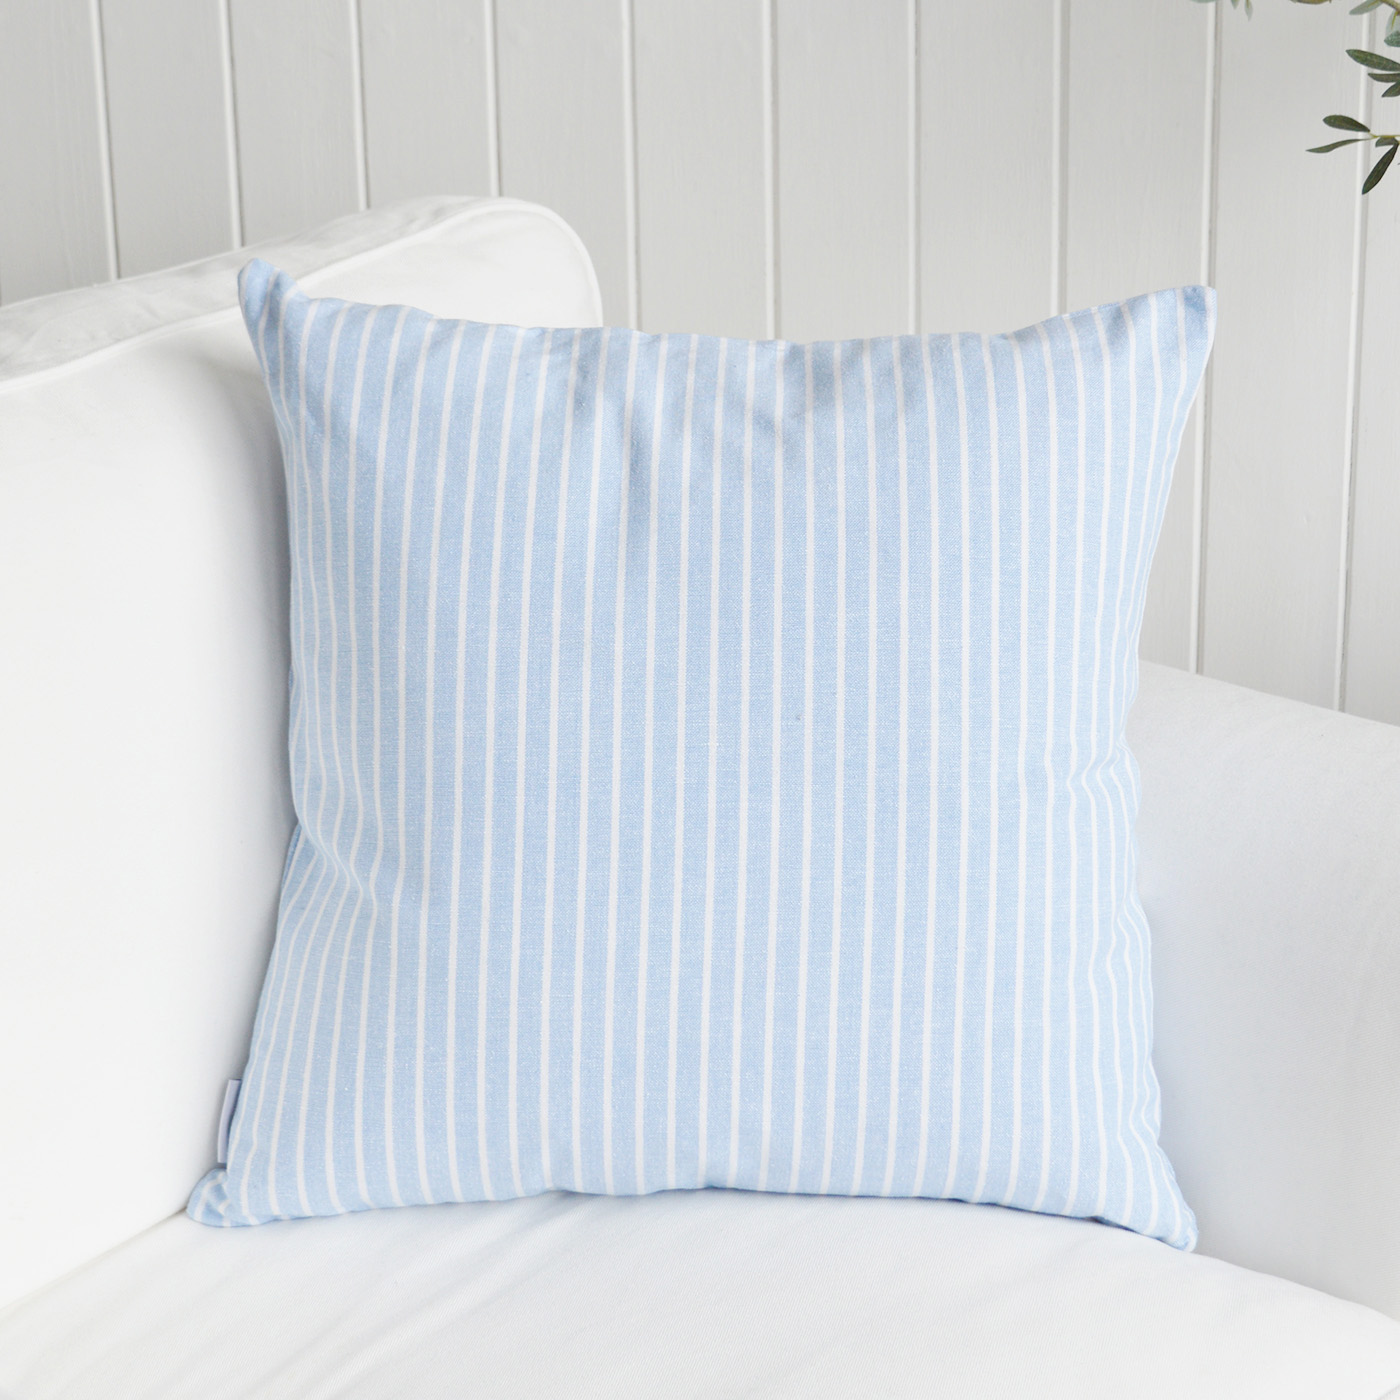 Beach Stripe Cushions in grey and light blue with inner for coastal New England coastal homes and interiors by the sea